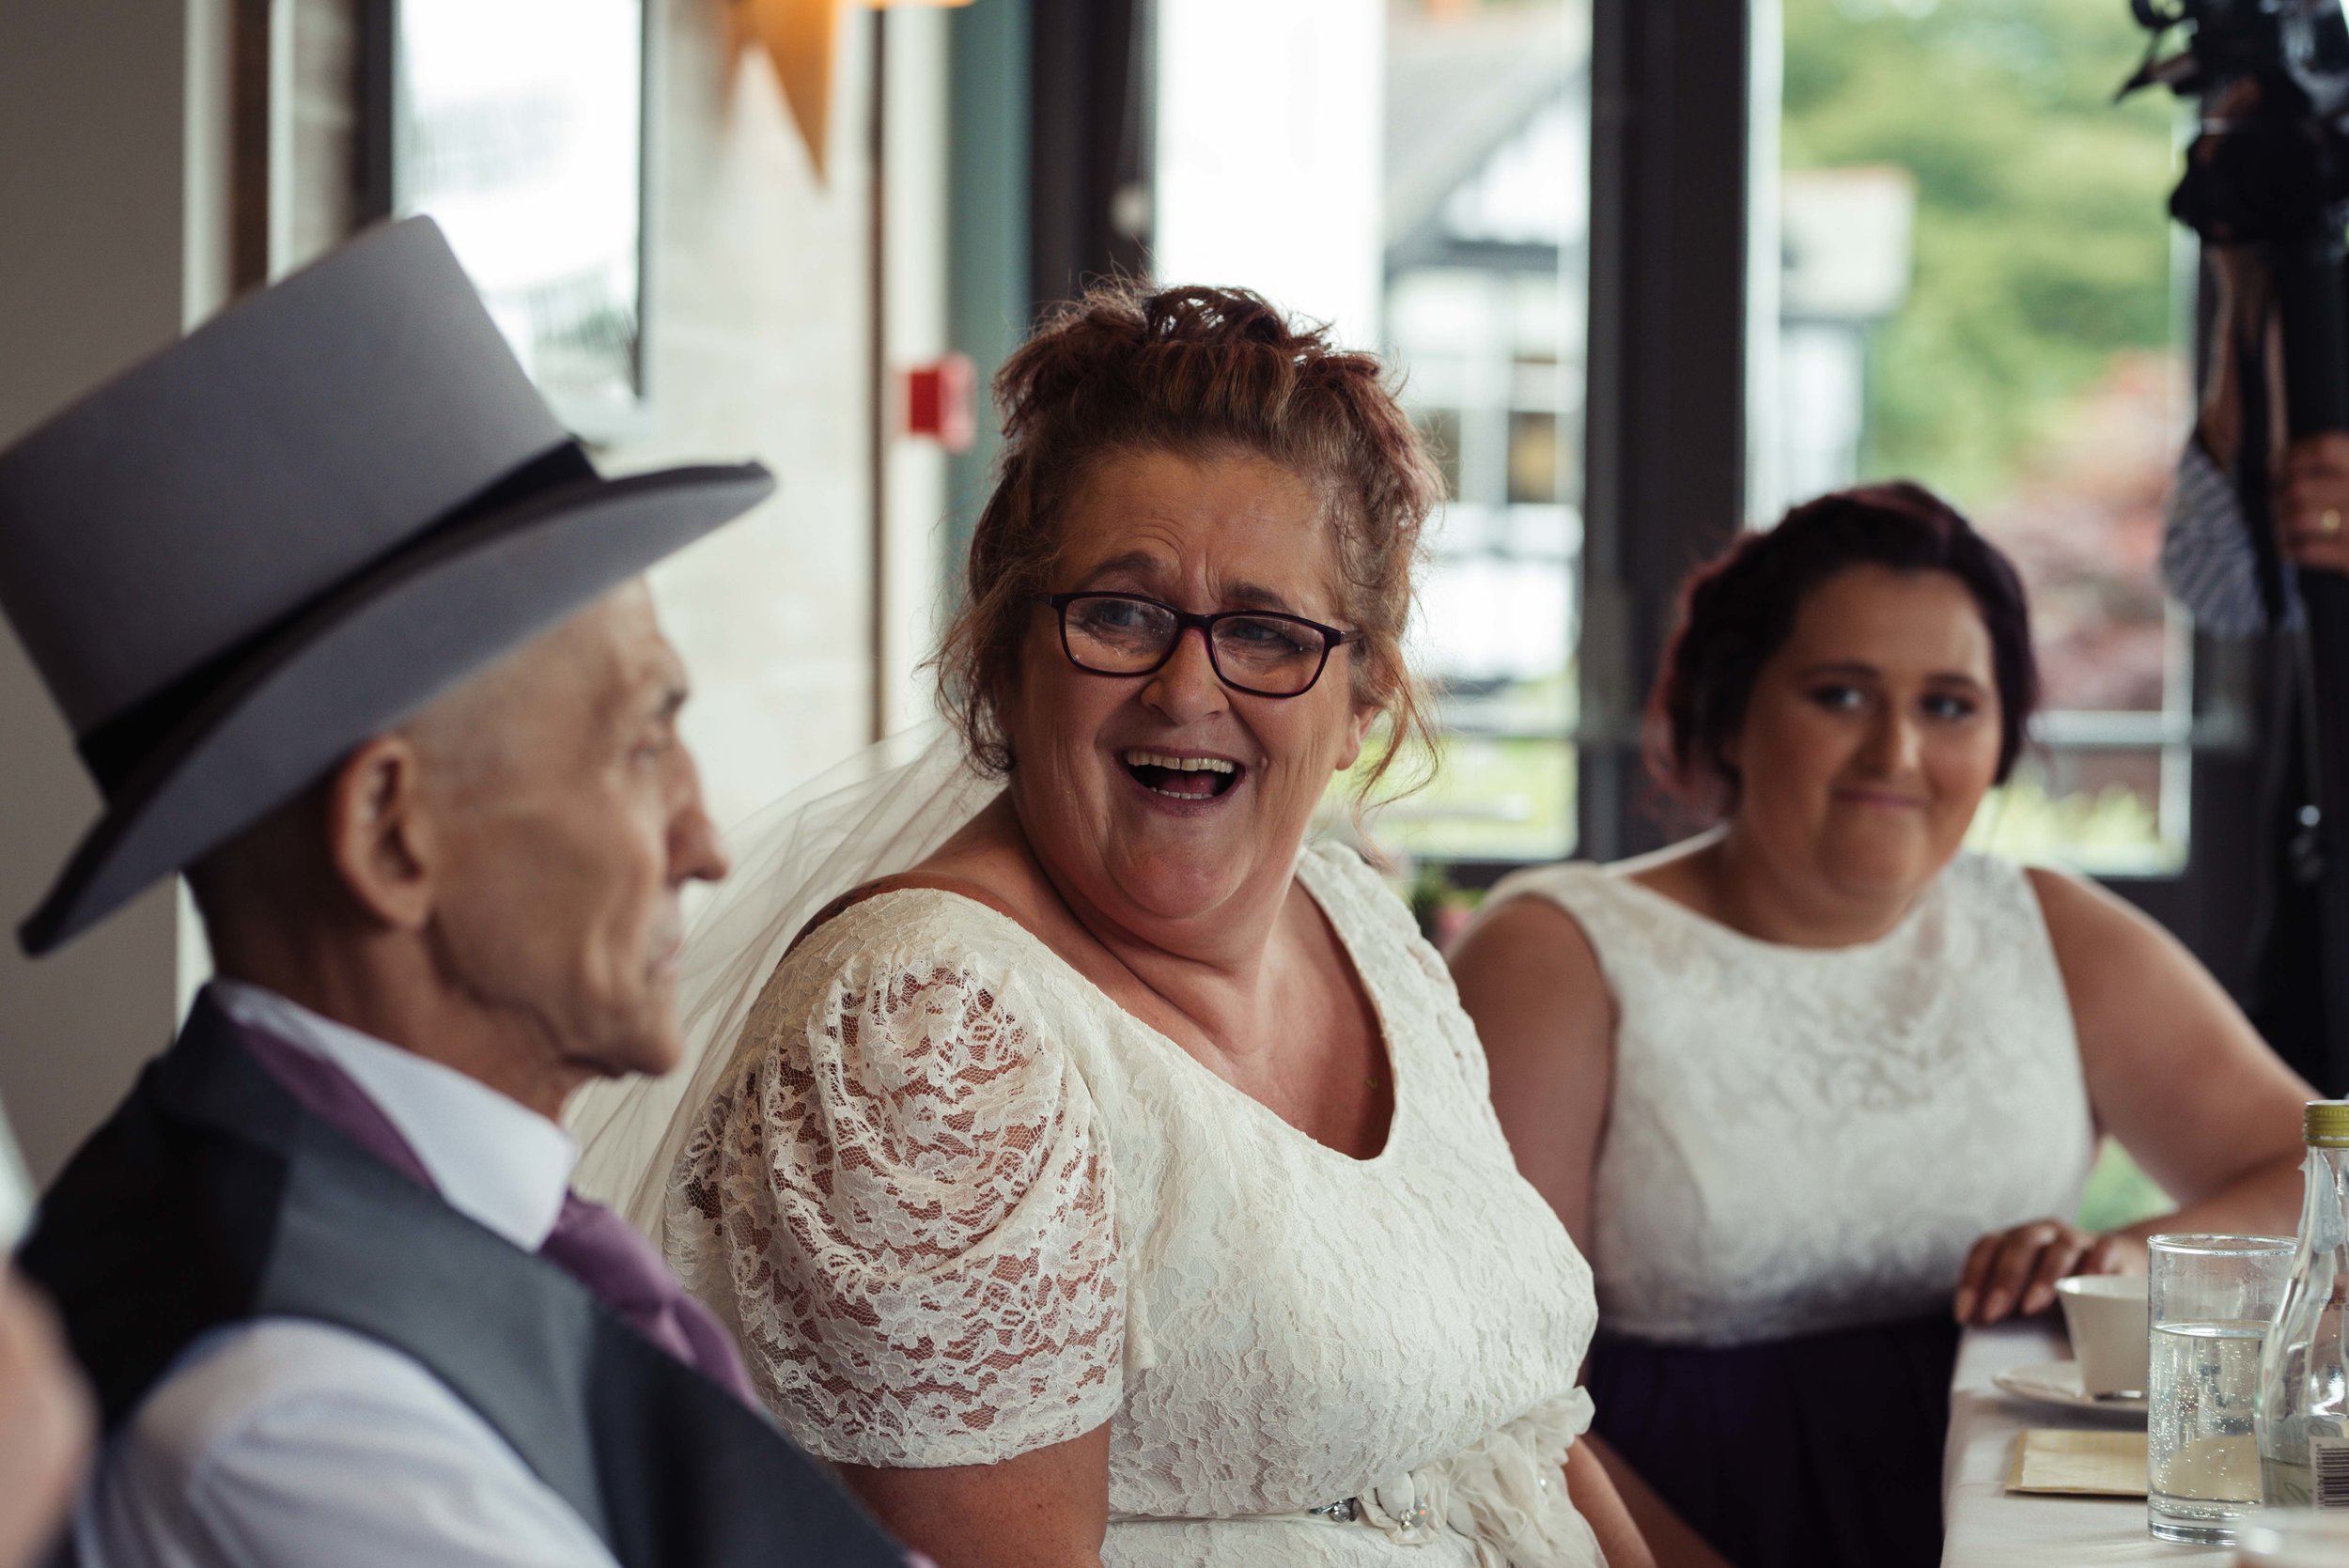 The bride looks to her new husband and laughs her head off